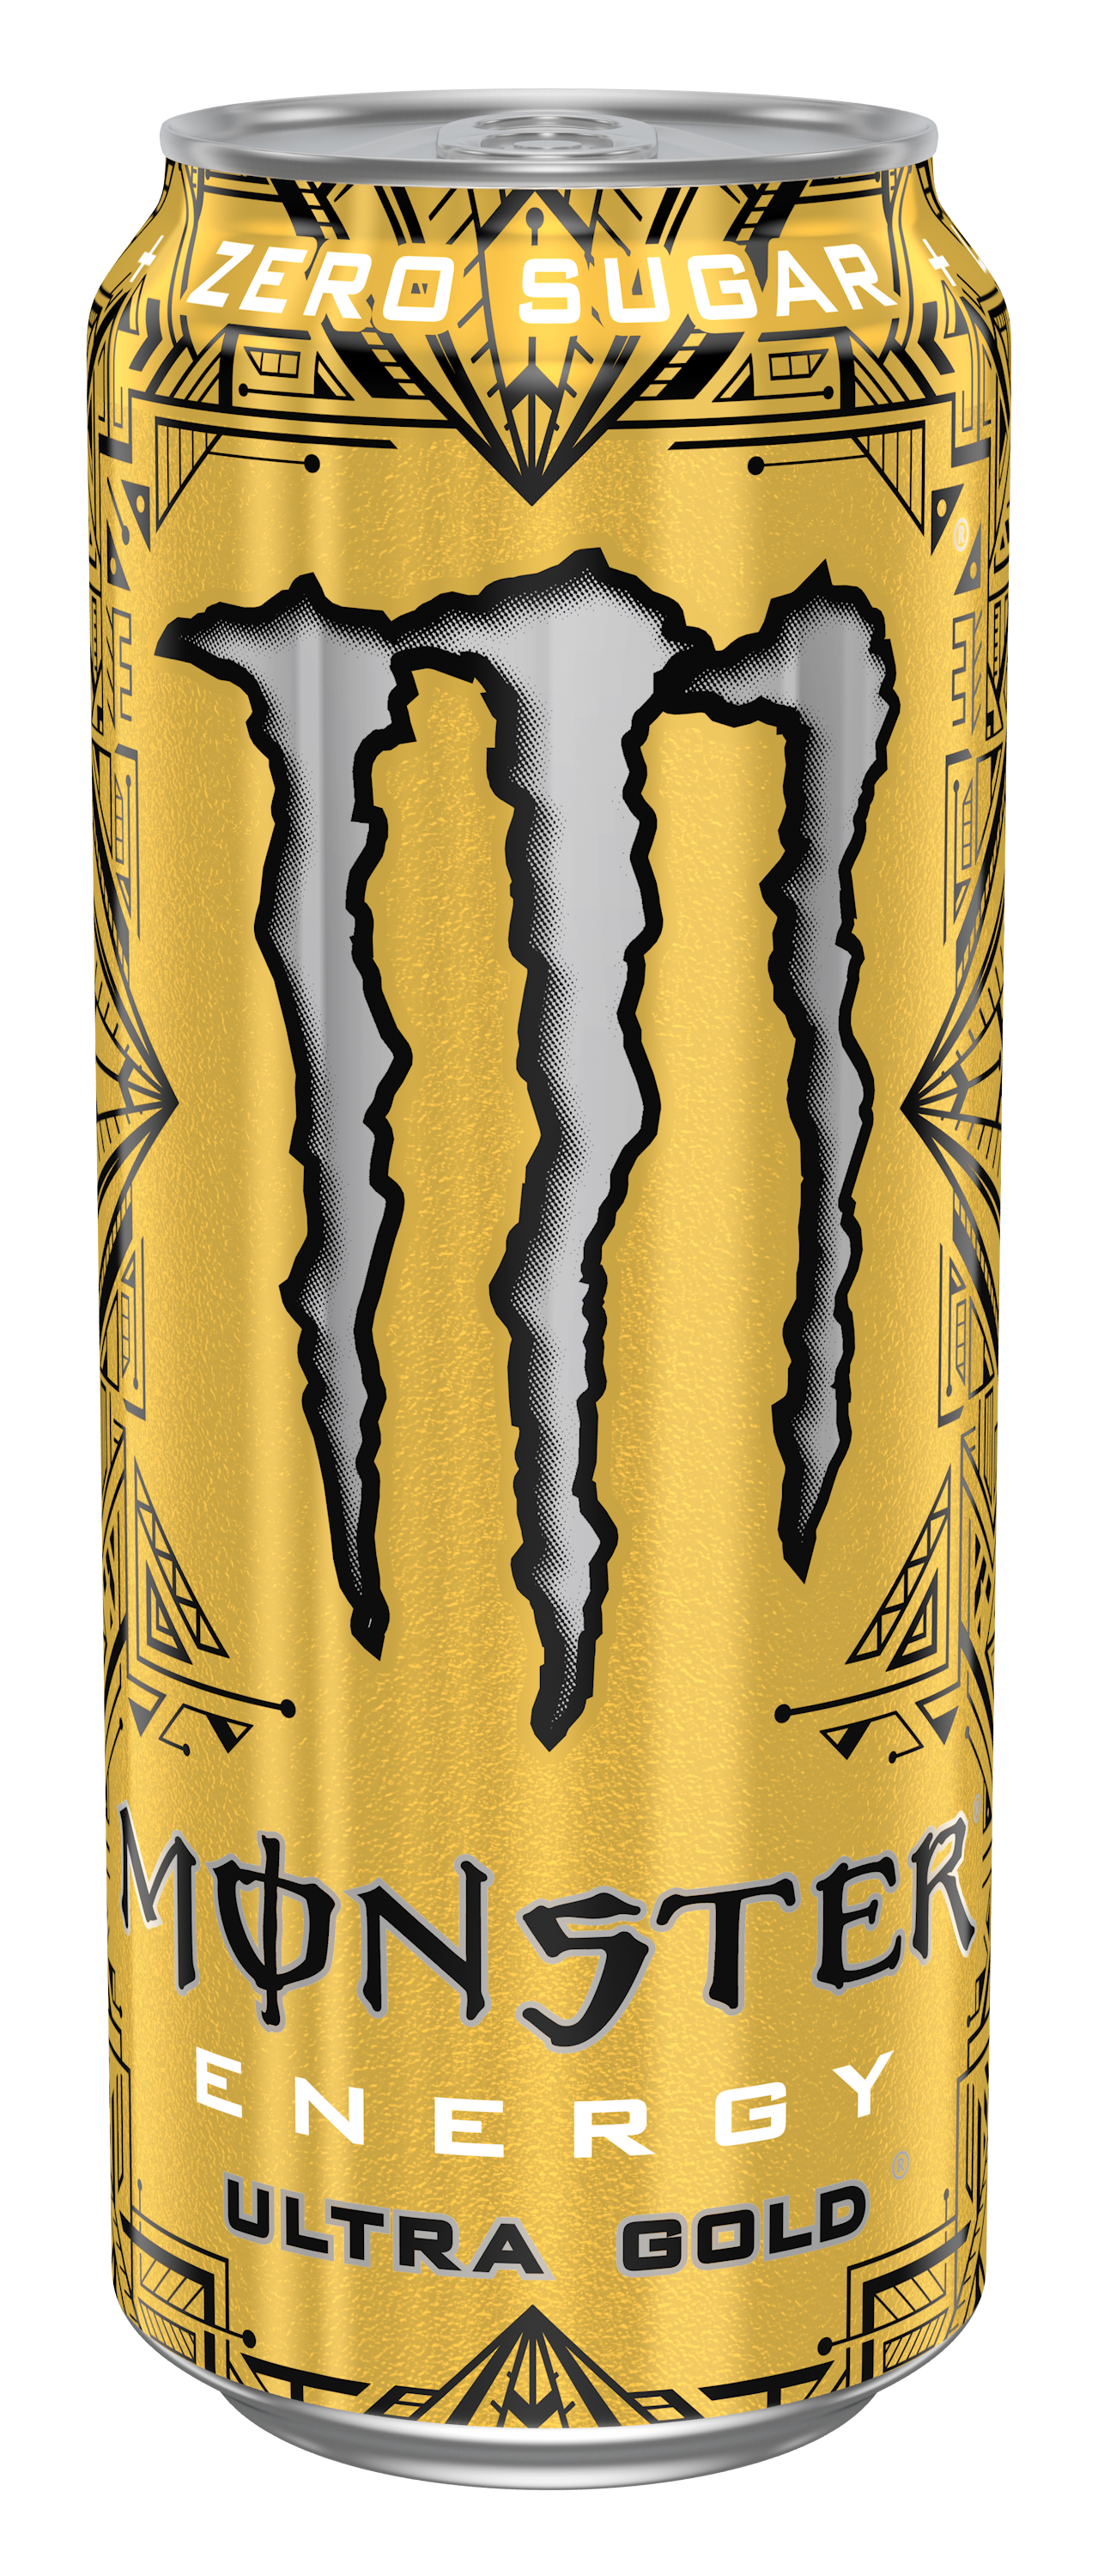 UK_Monster_Ultra Gold_500ml_Can_POS_1021 (3)